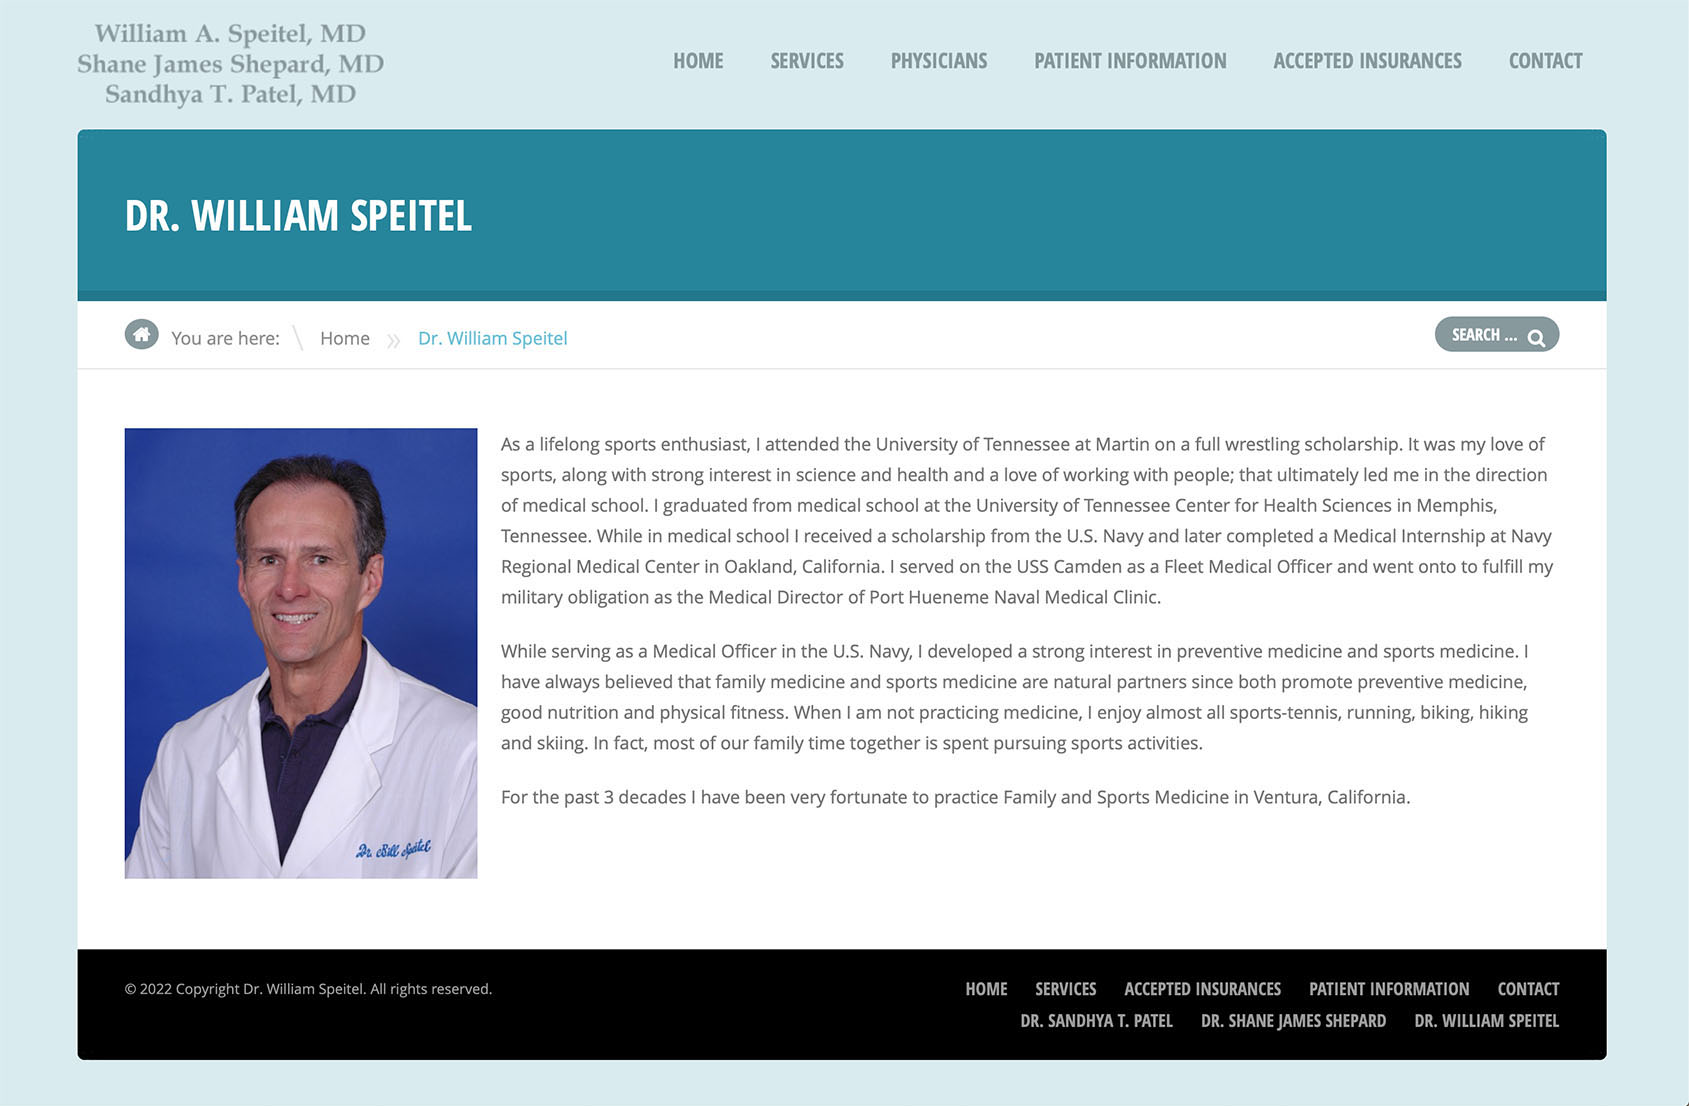 Physician page for William A. Speitel MD